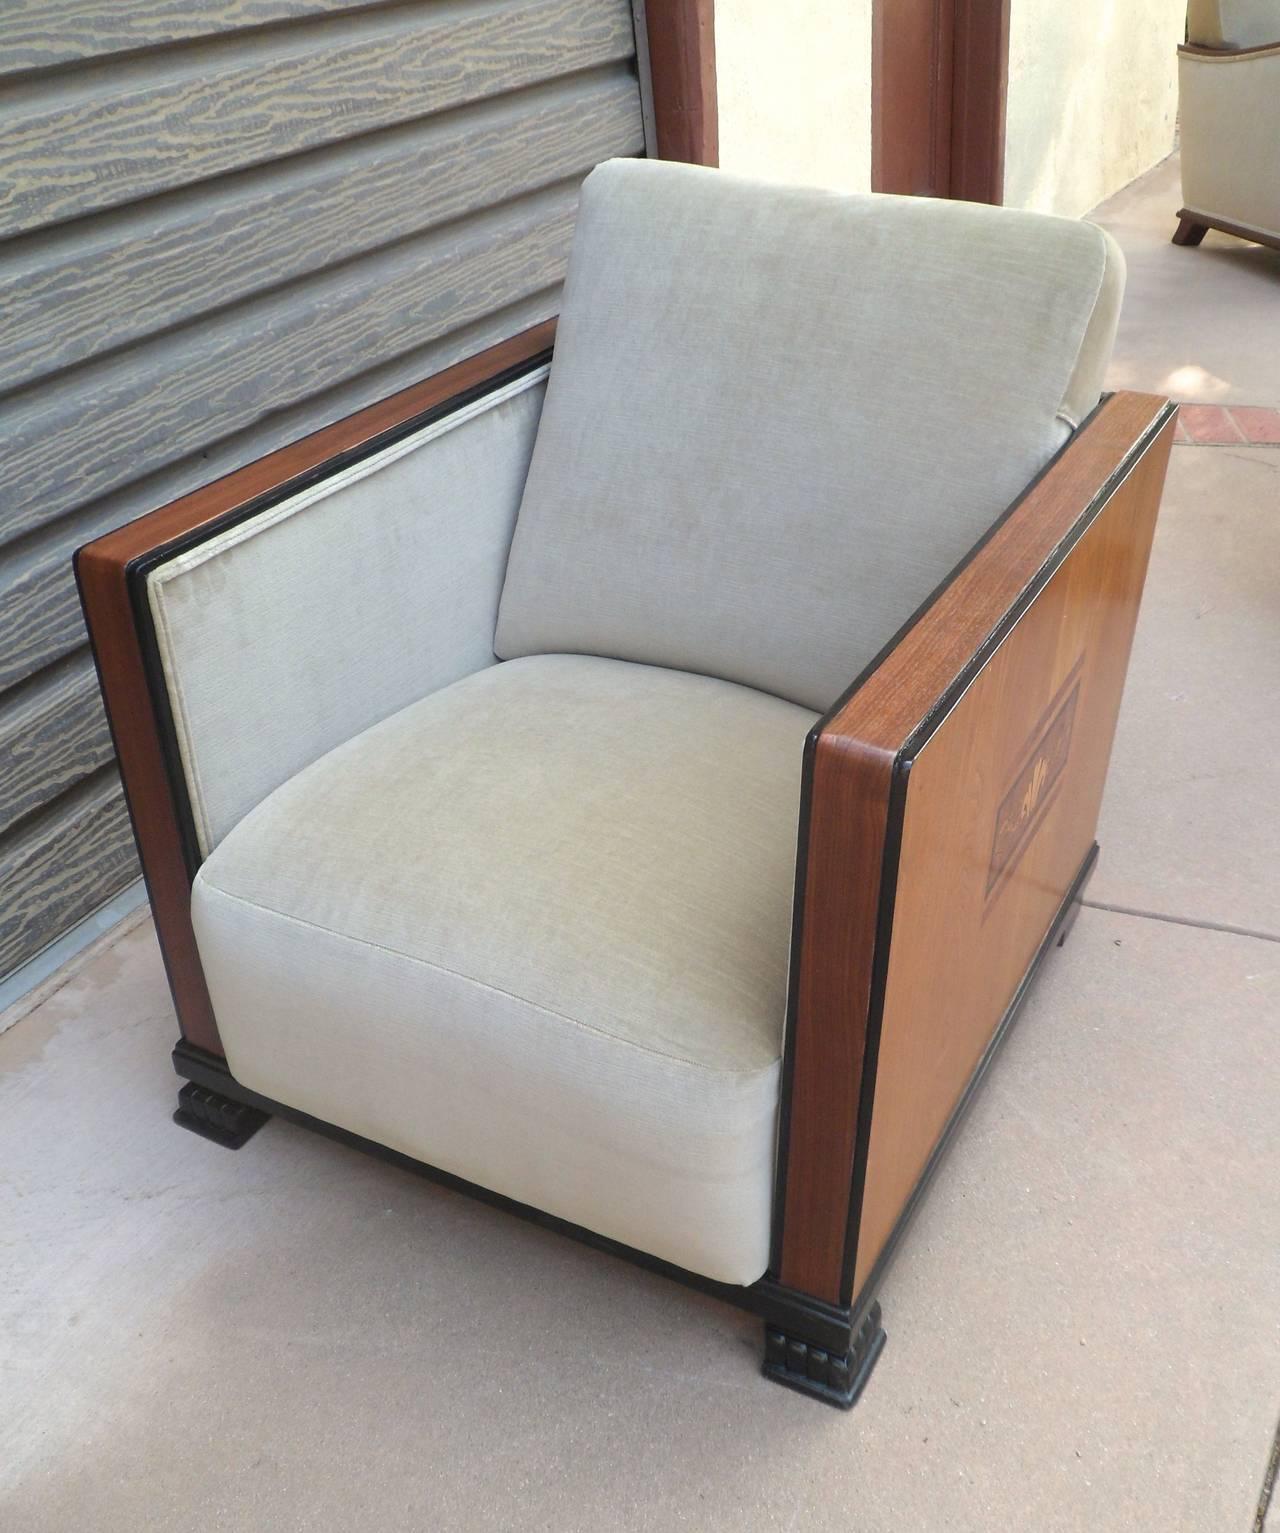 Swedish Art Deco Inlaid Paneled Chair by Mjolby Intarsia, circa 1930 In Excellent Condition For Sale In Richmond, VA